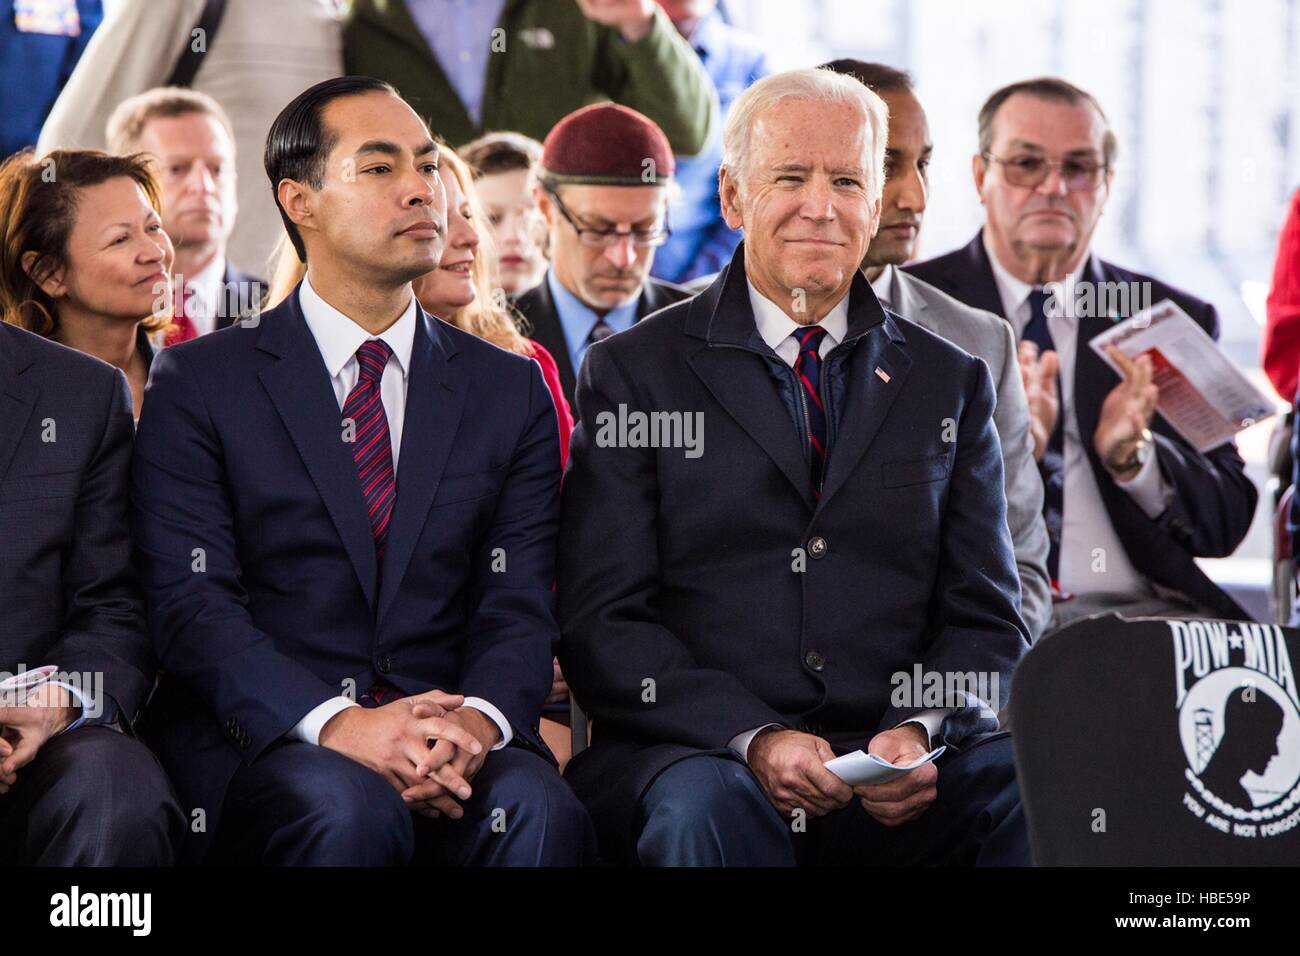 U.S. Vice President Joe Biden sits with HUD Secretary Julian Castro during the annual Veterans Day ceremony at War Memorial Bridge Plaza November 11, 2016 in New Castle, Delaware. The event celebrated the state's effort in reducing homelessness among veterans. Stock Photo